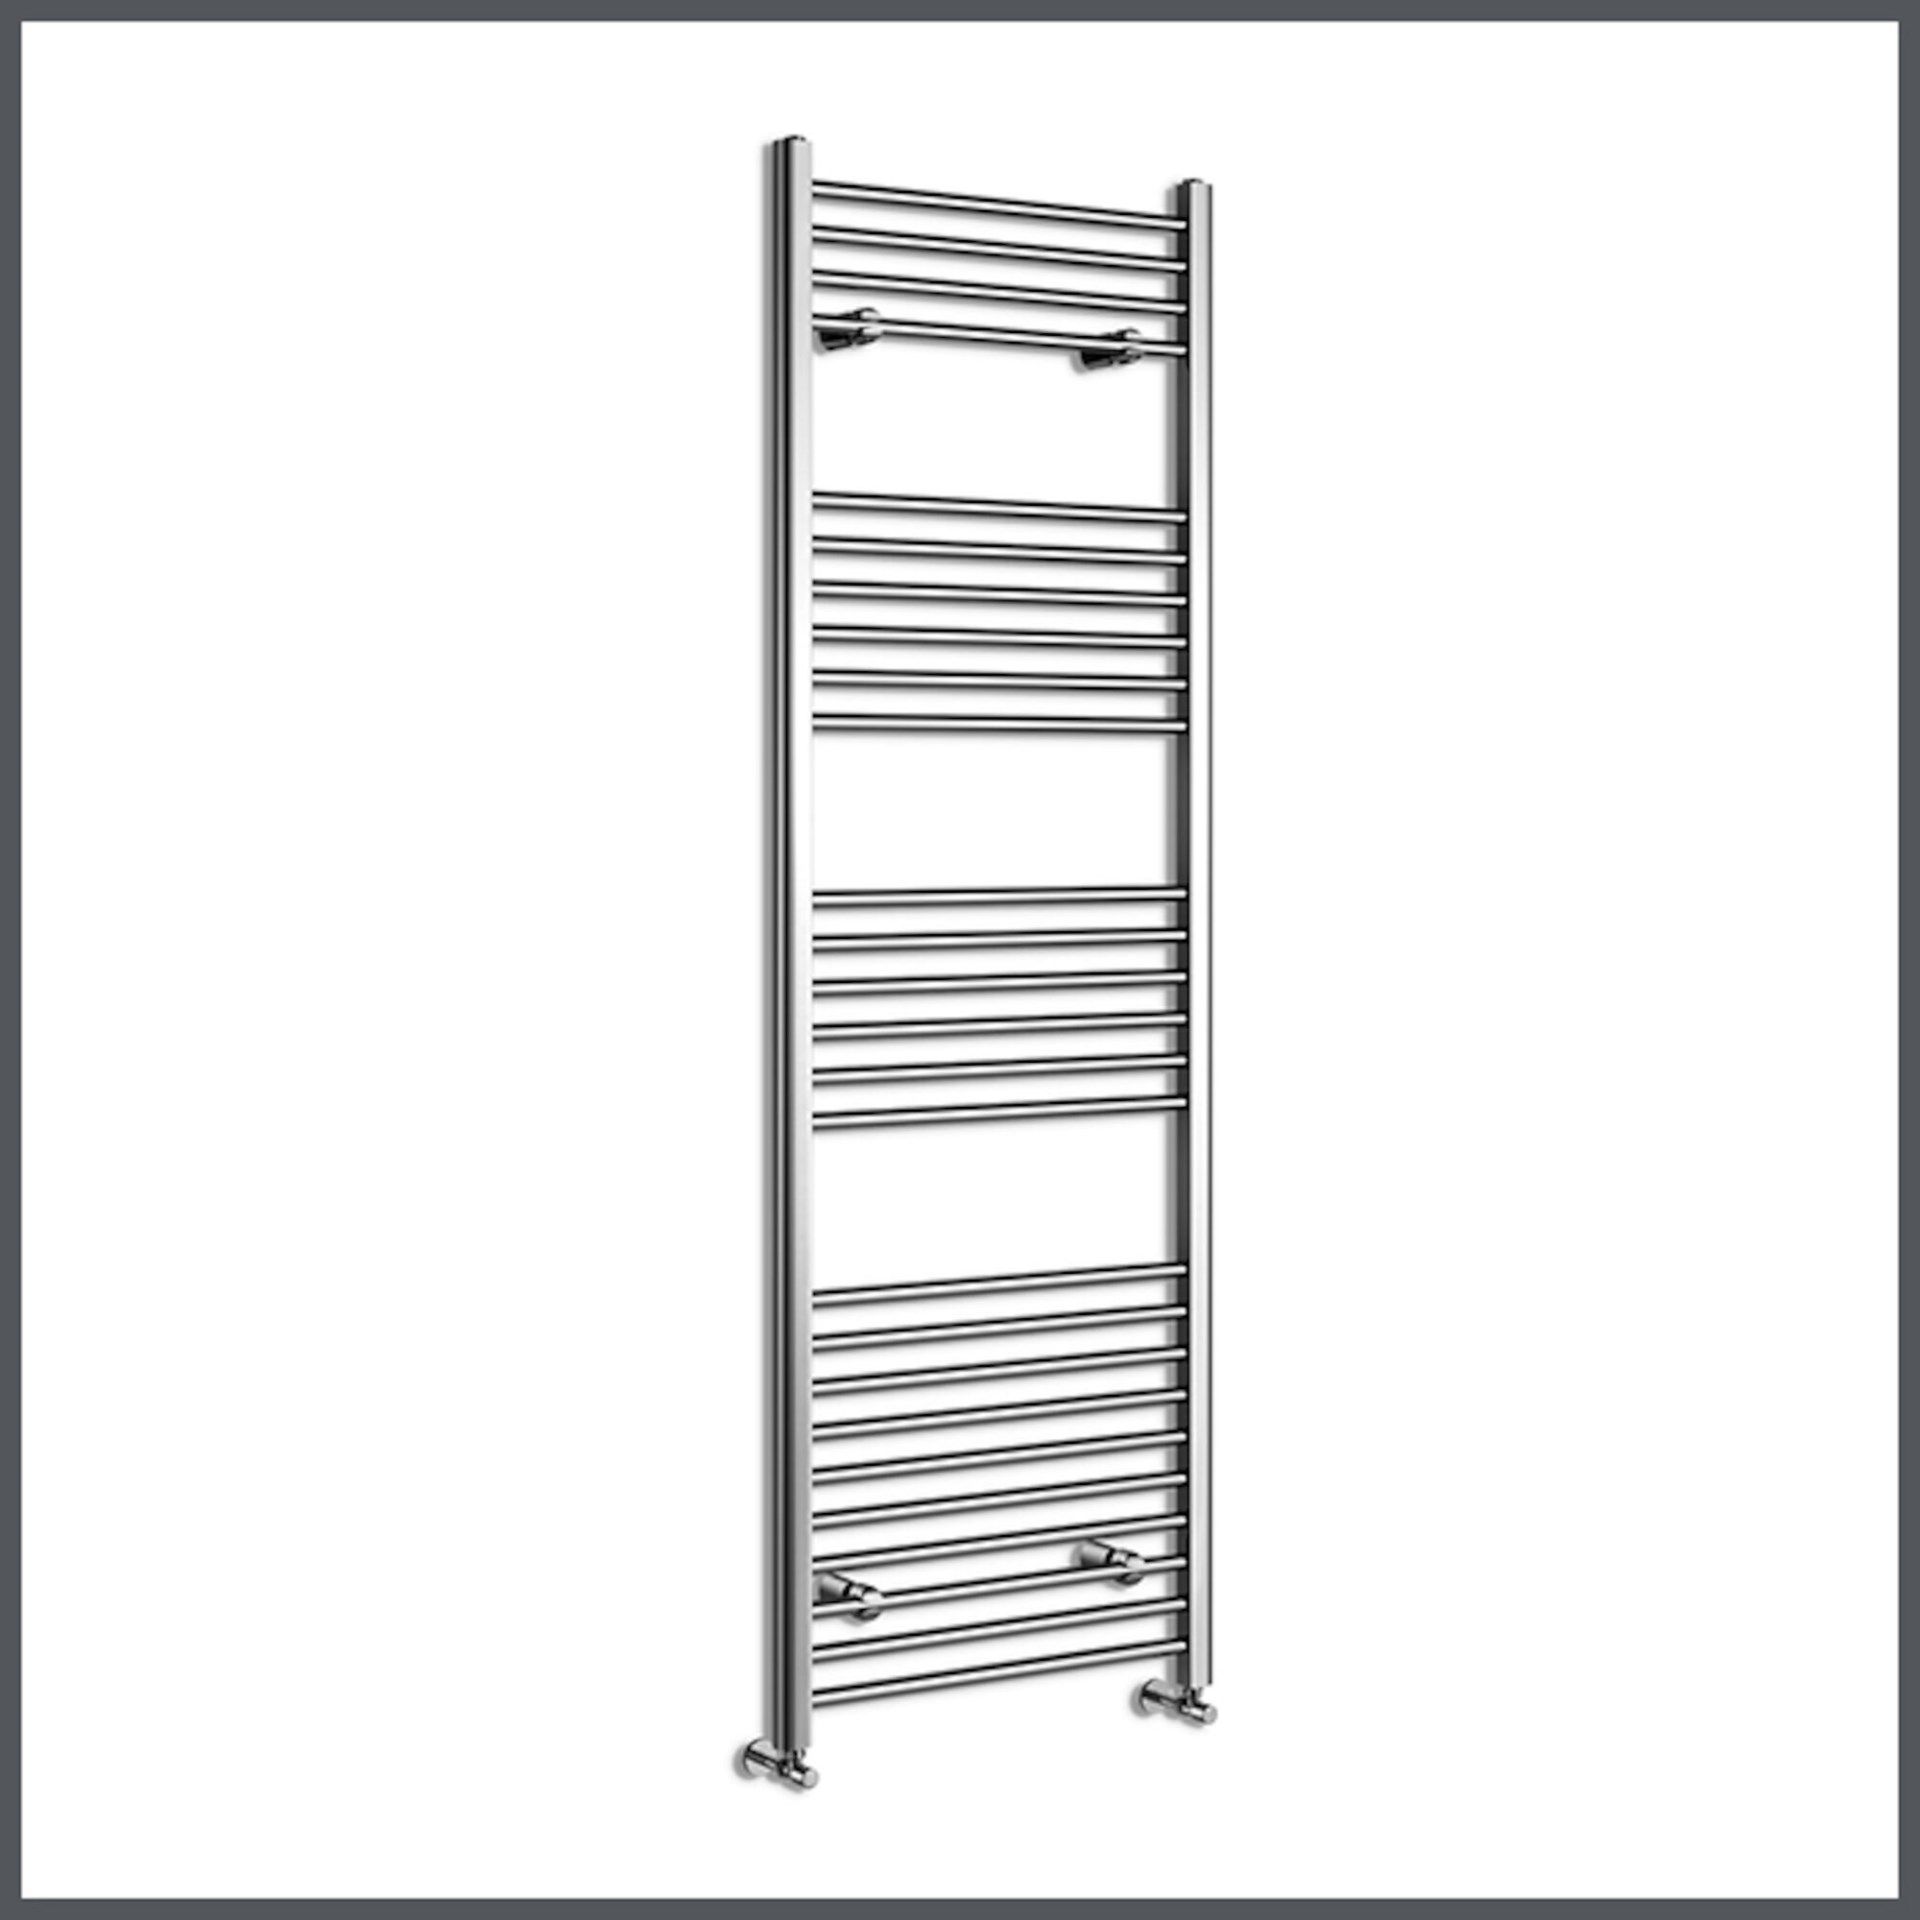 (VD159) 1200x450mm Straight Heated Towel Radiator.RRP £354.99.Transform your bathroom with th...